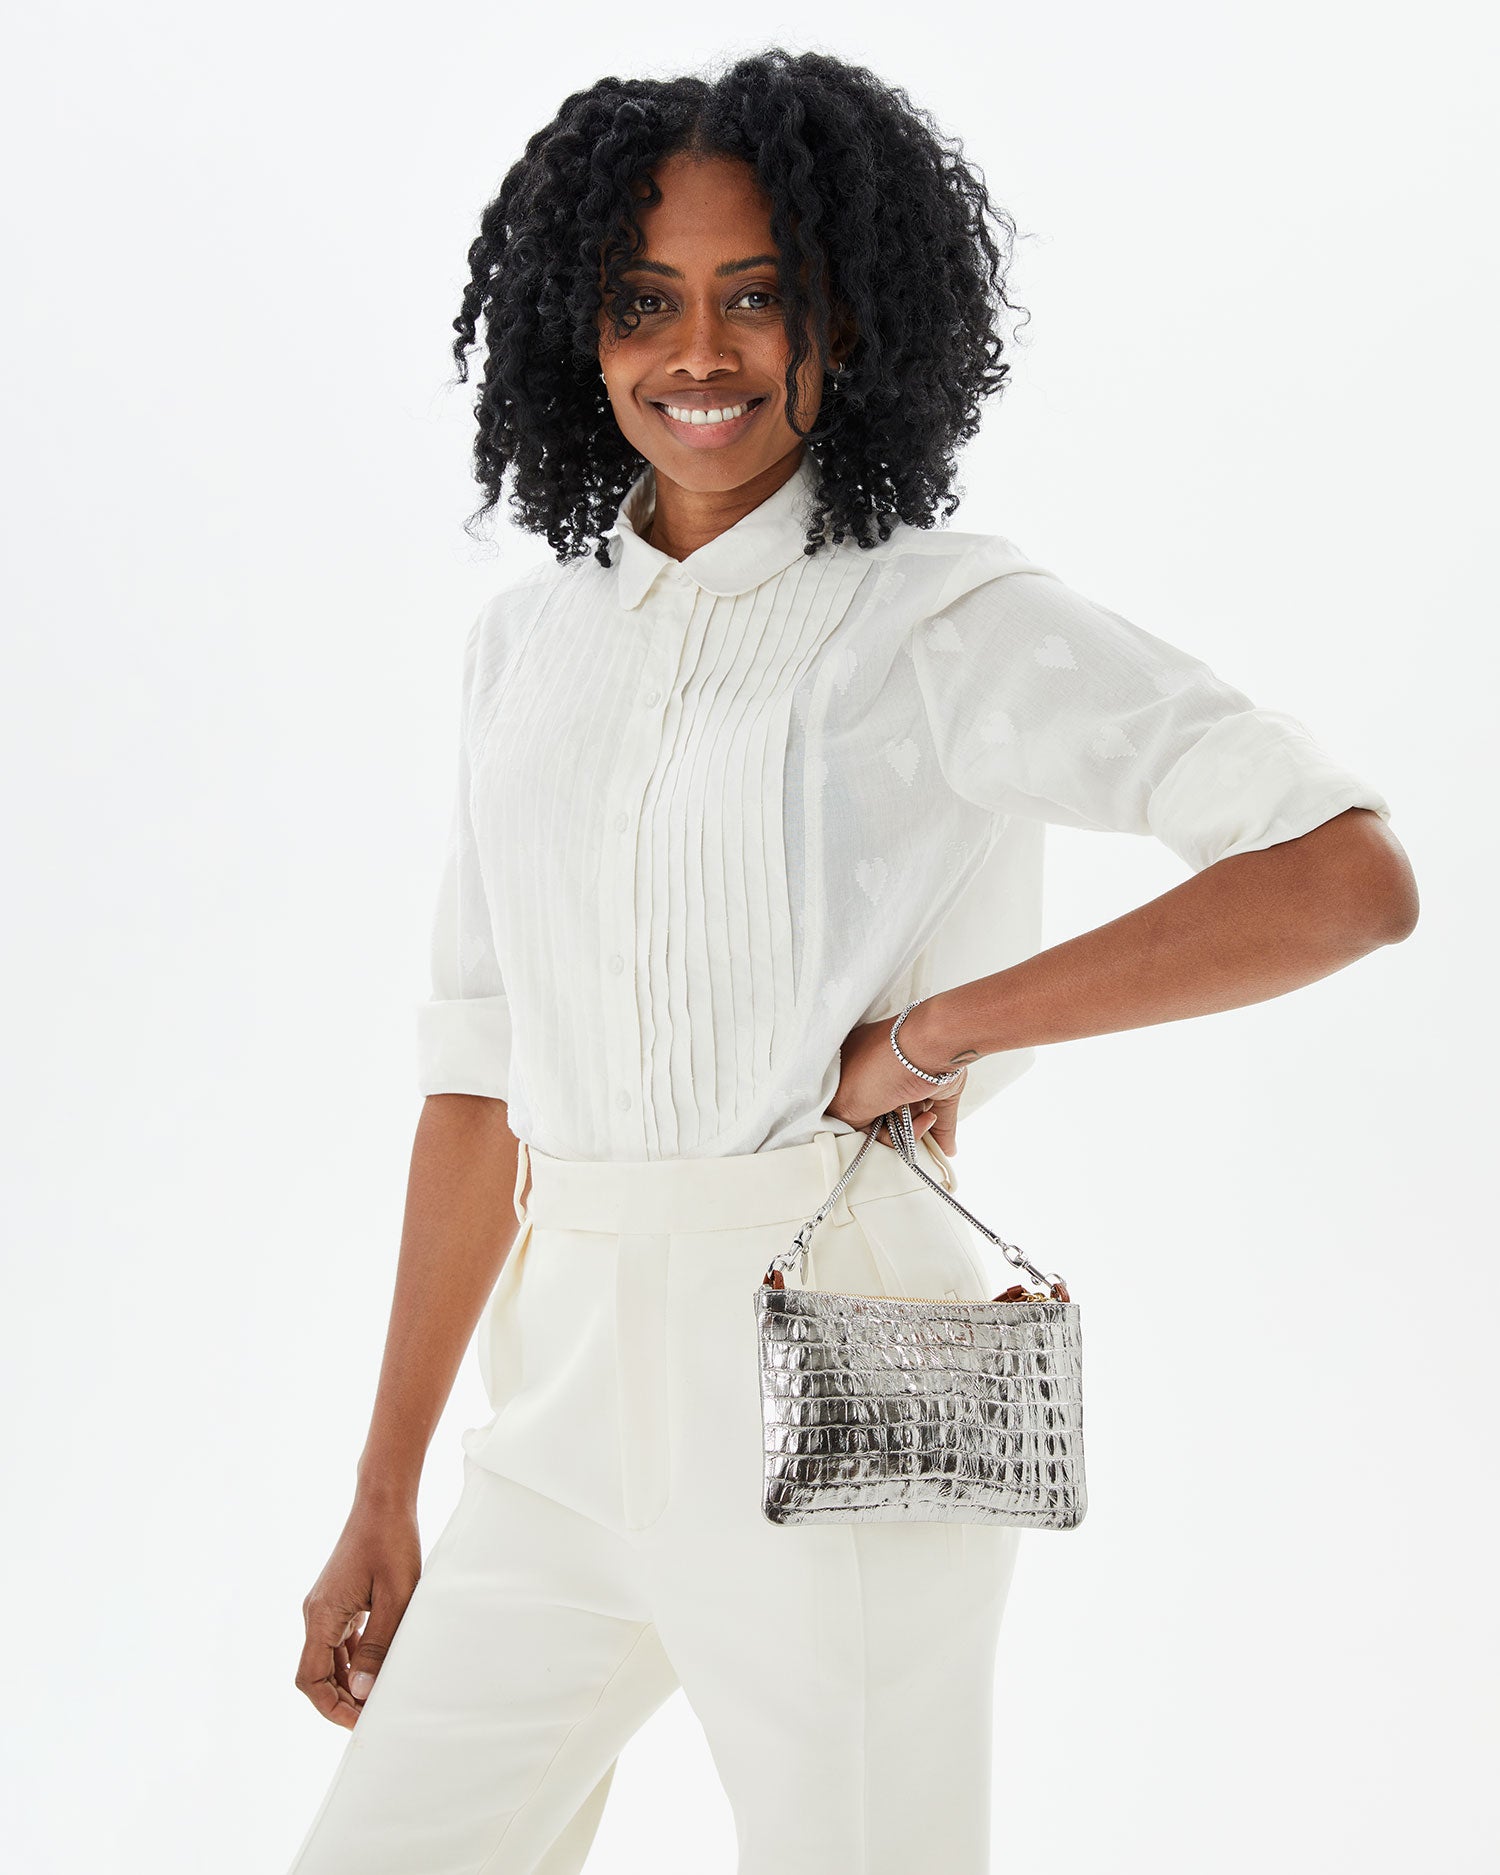 Mecca in an all white outfit with her hand on her hip with the Silver Metallic Croco Wallet Clutch w/ Tabs 